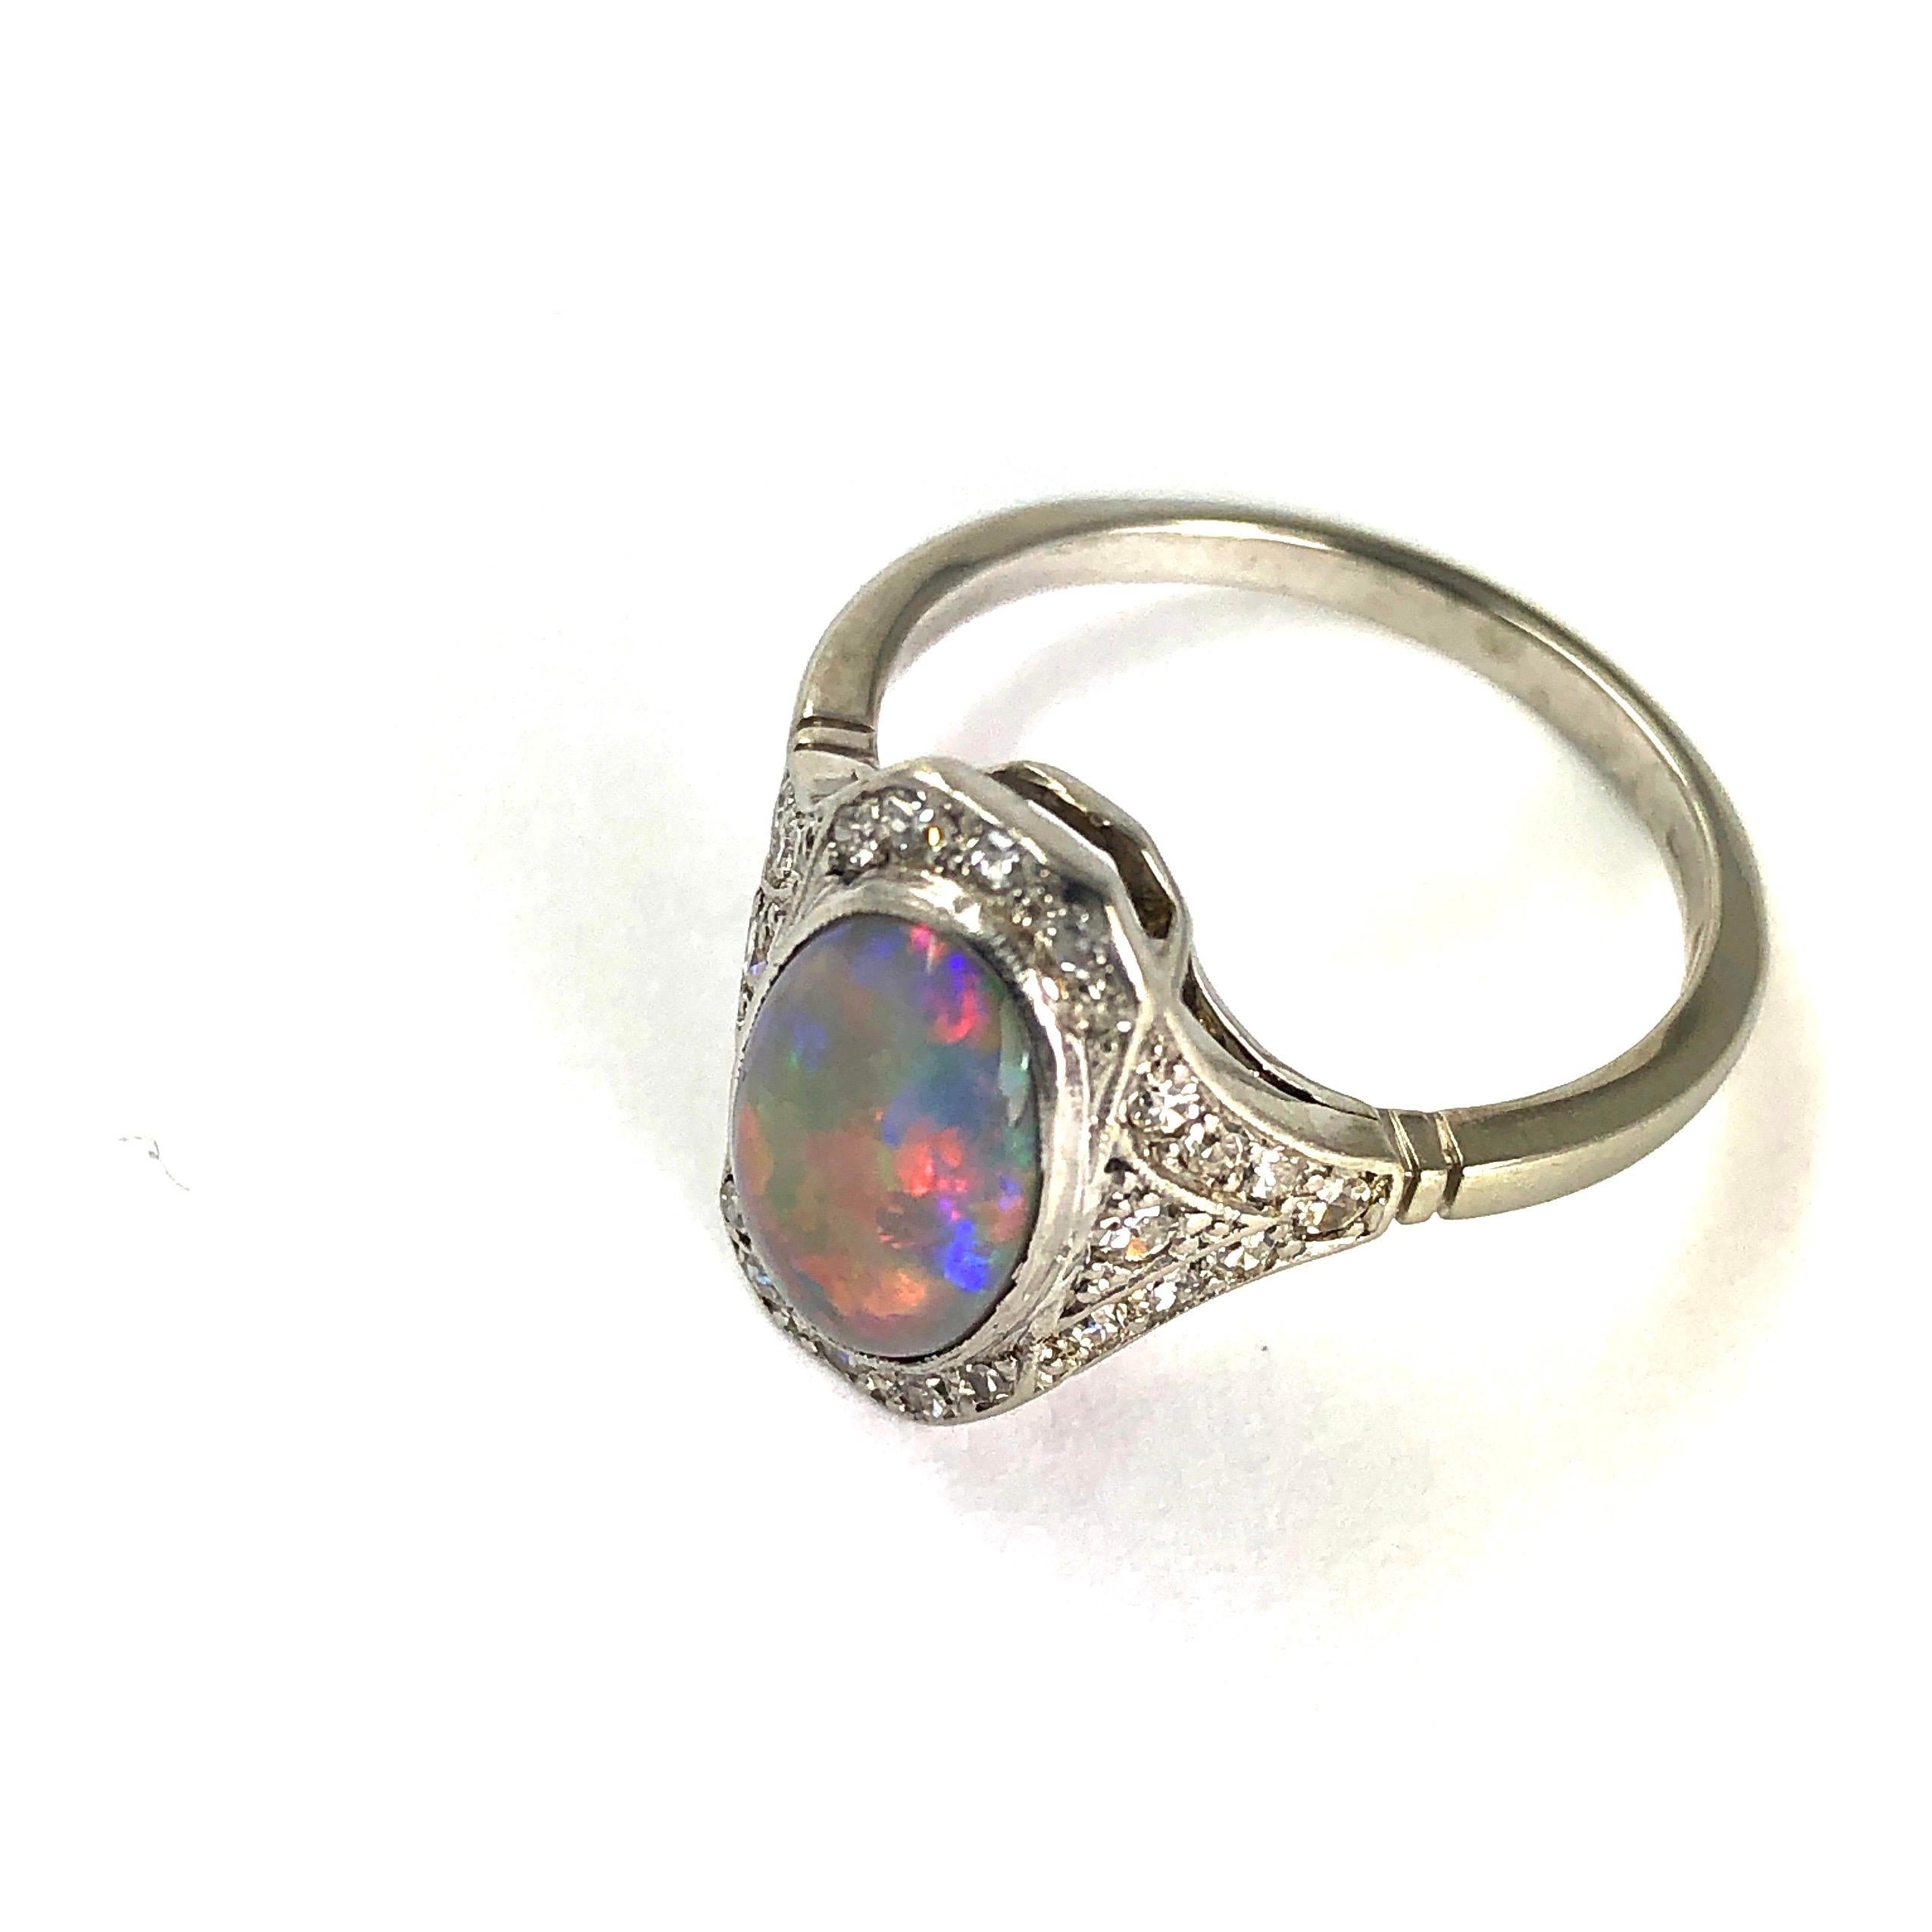 This show stopping piece holds an opal which measures approximately 2cts. The opal has so many fleck of colour that appear as it is moved in the light. The pictures do not do it justice! Around the central stone is a halo of old European cut